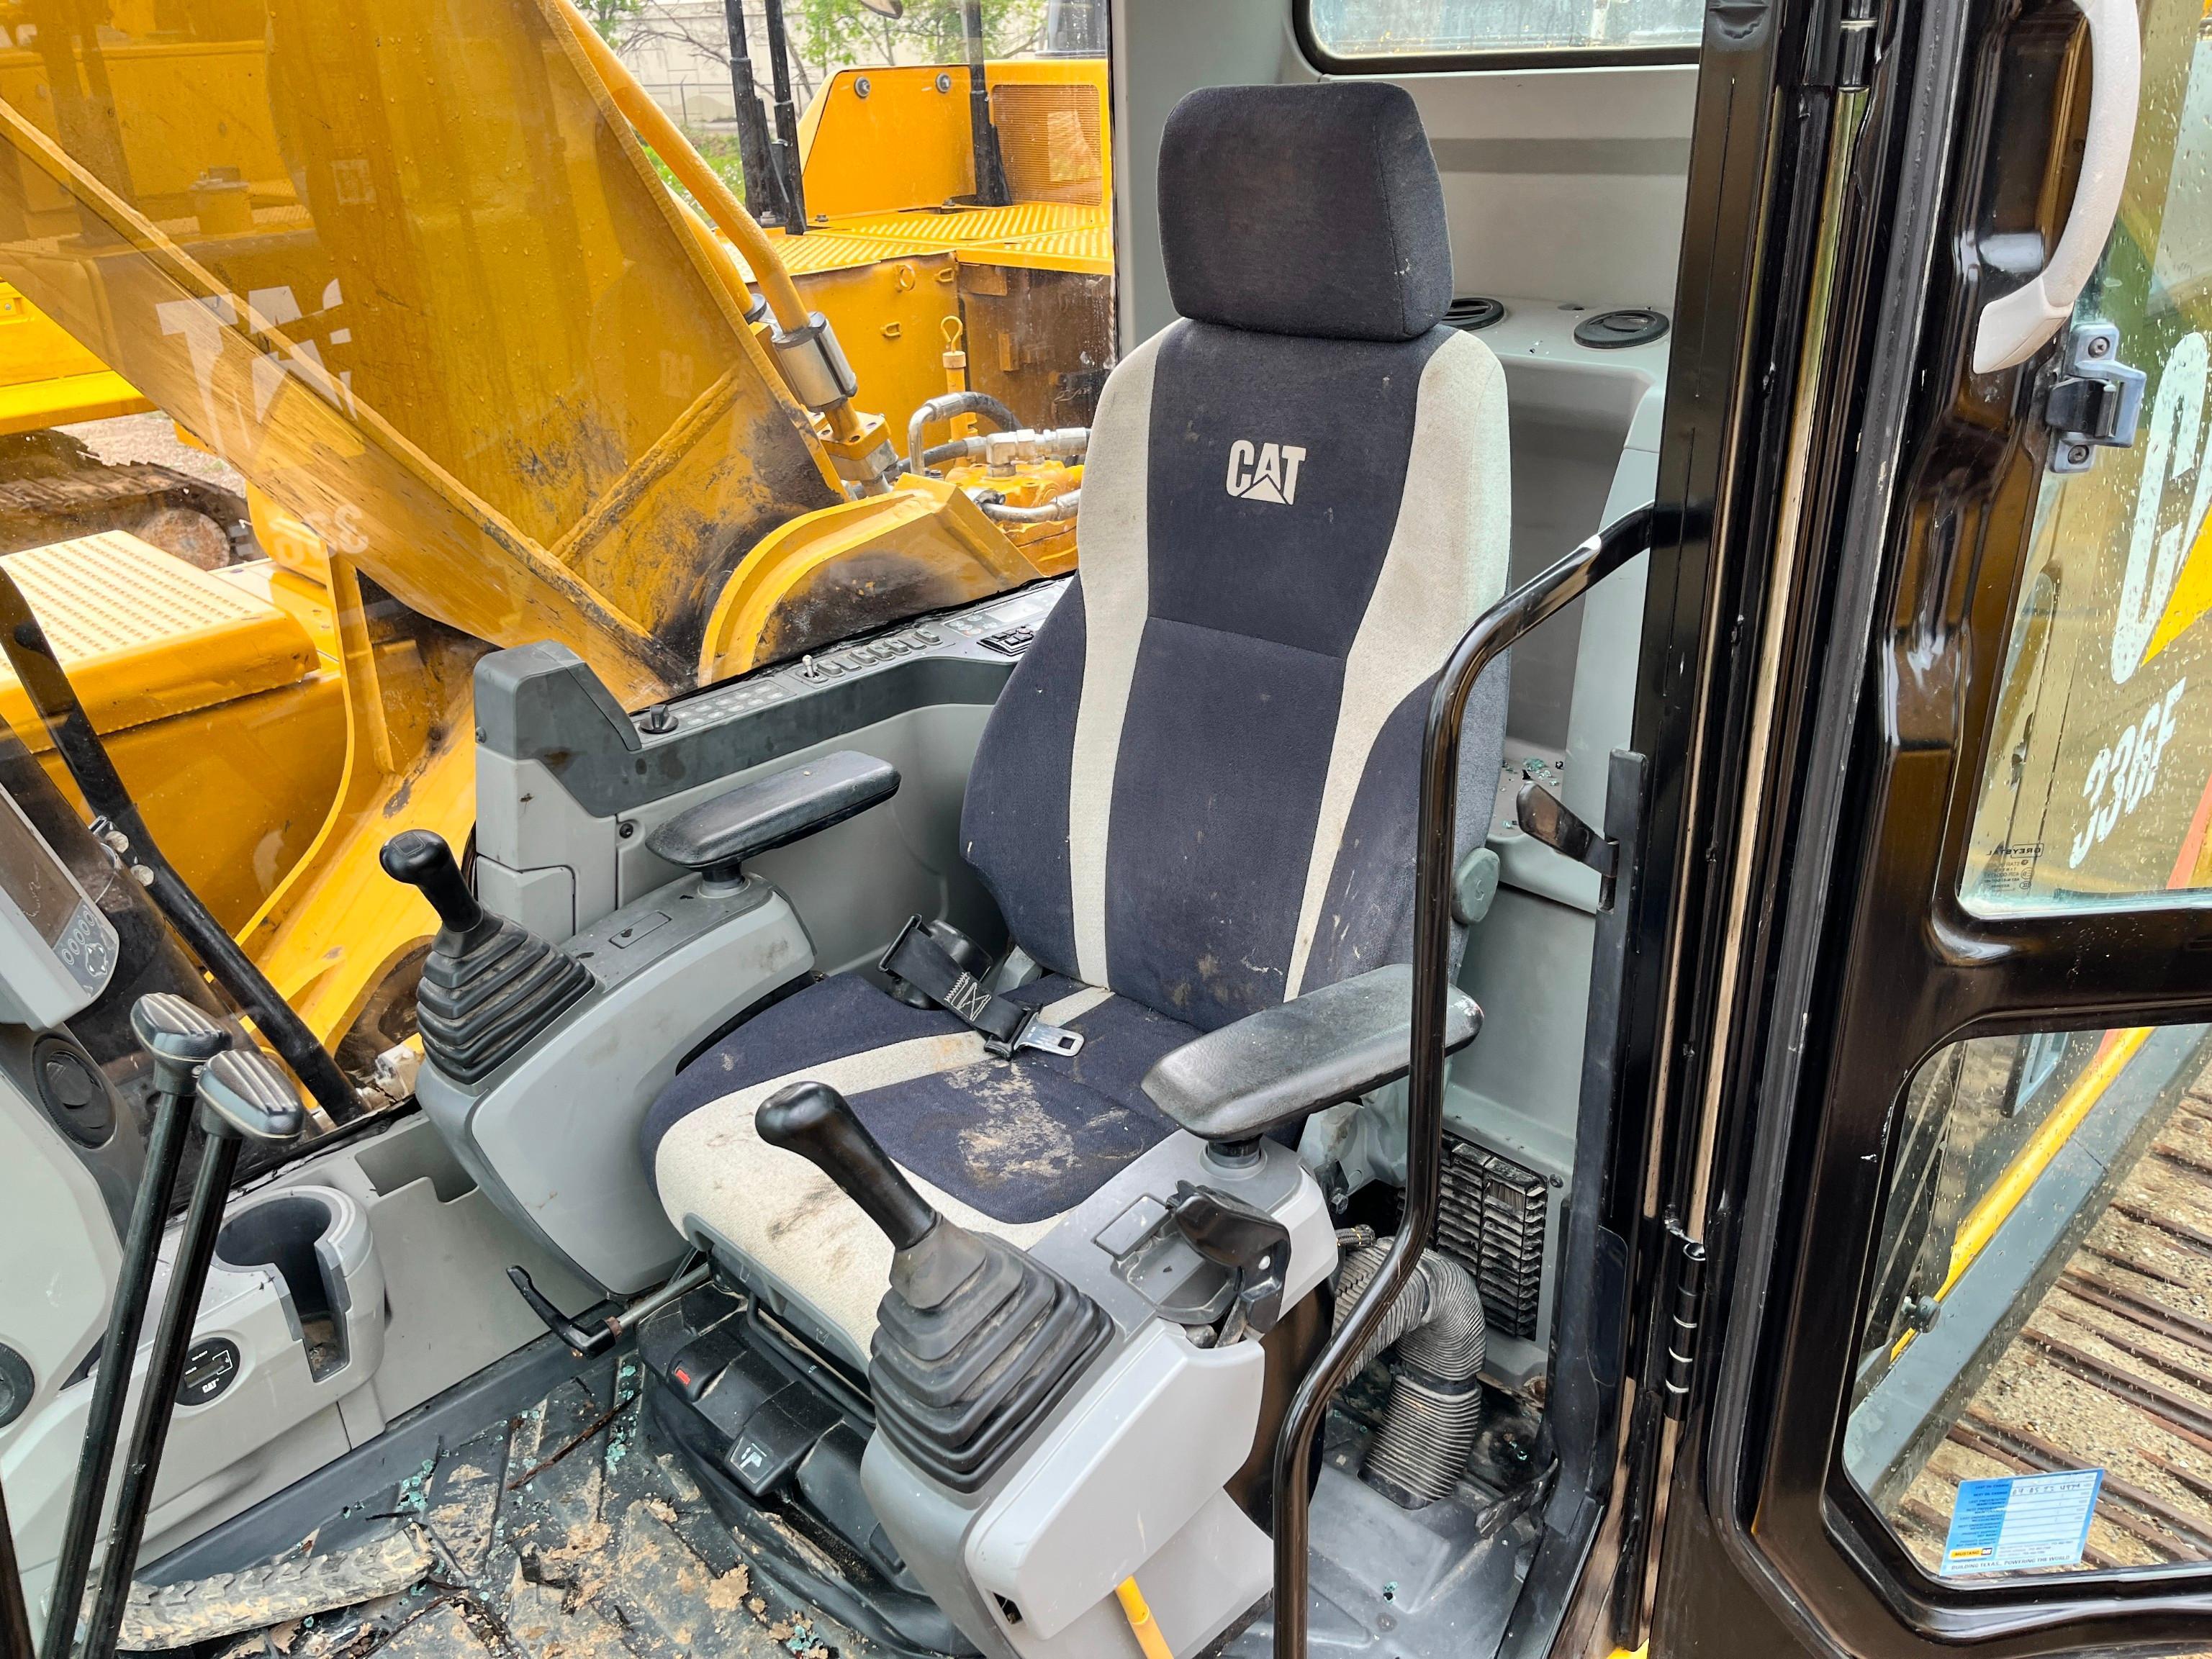 2018 CAT 336FL HYDRAULIC EXCAVATOR SN:CAT0336FCRKB21244 powered by Cat C9.3 diesel engine, equipped